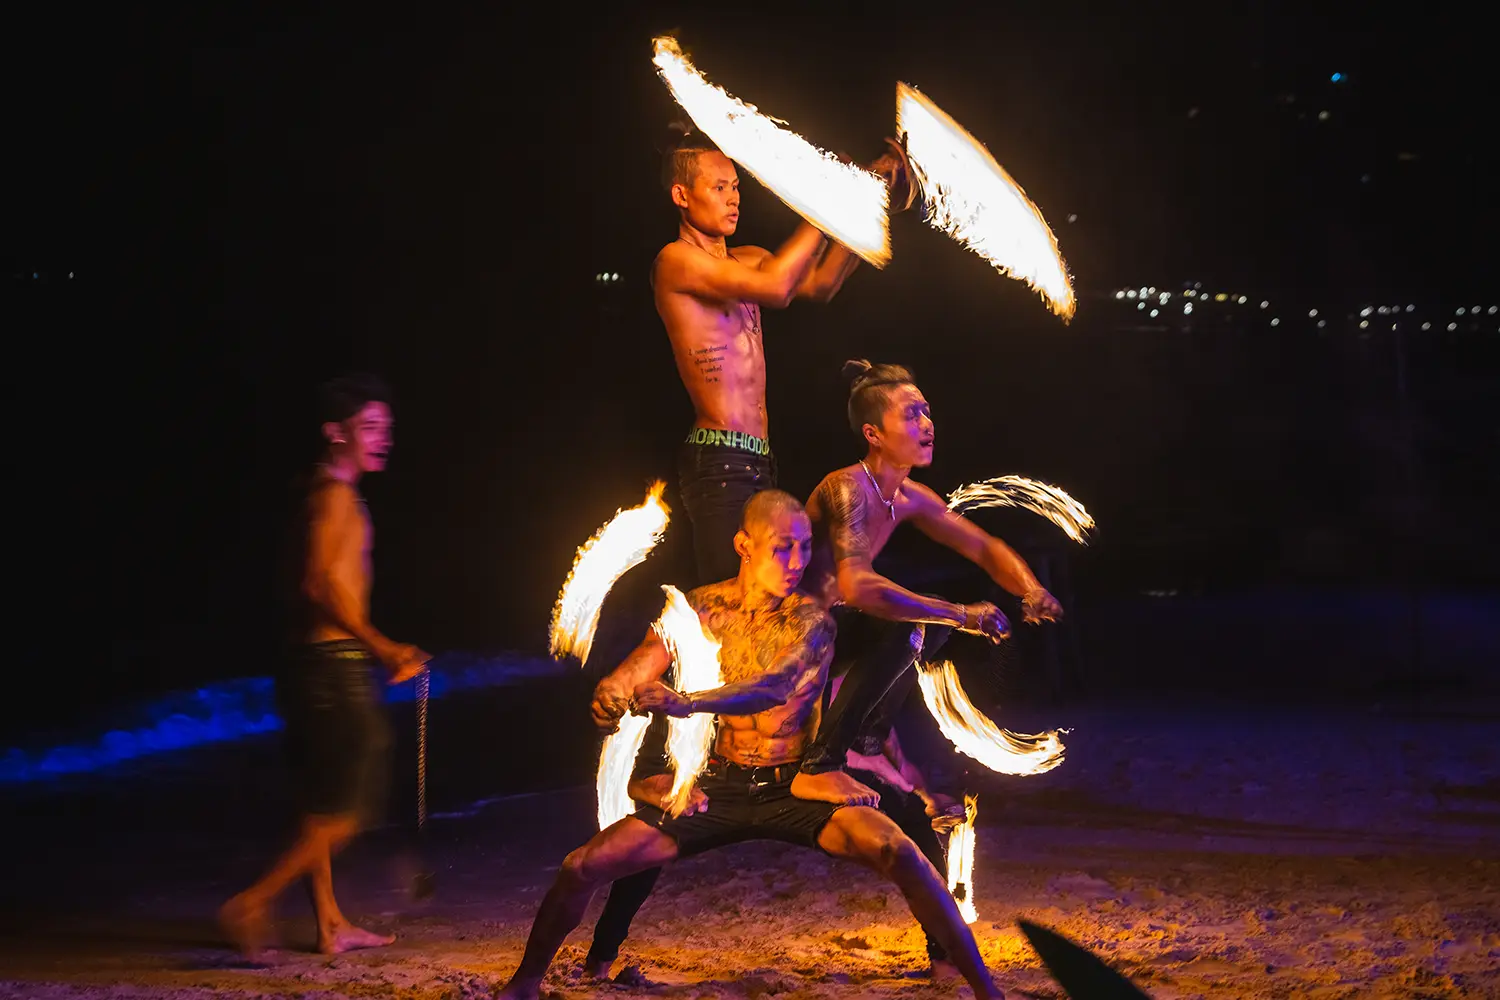 Fire Show on the beach in Koh Tao, Thailand